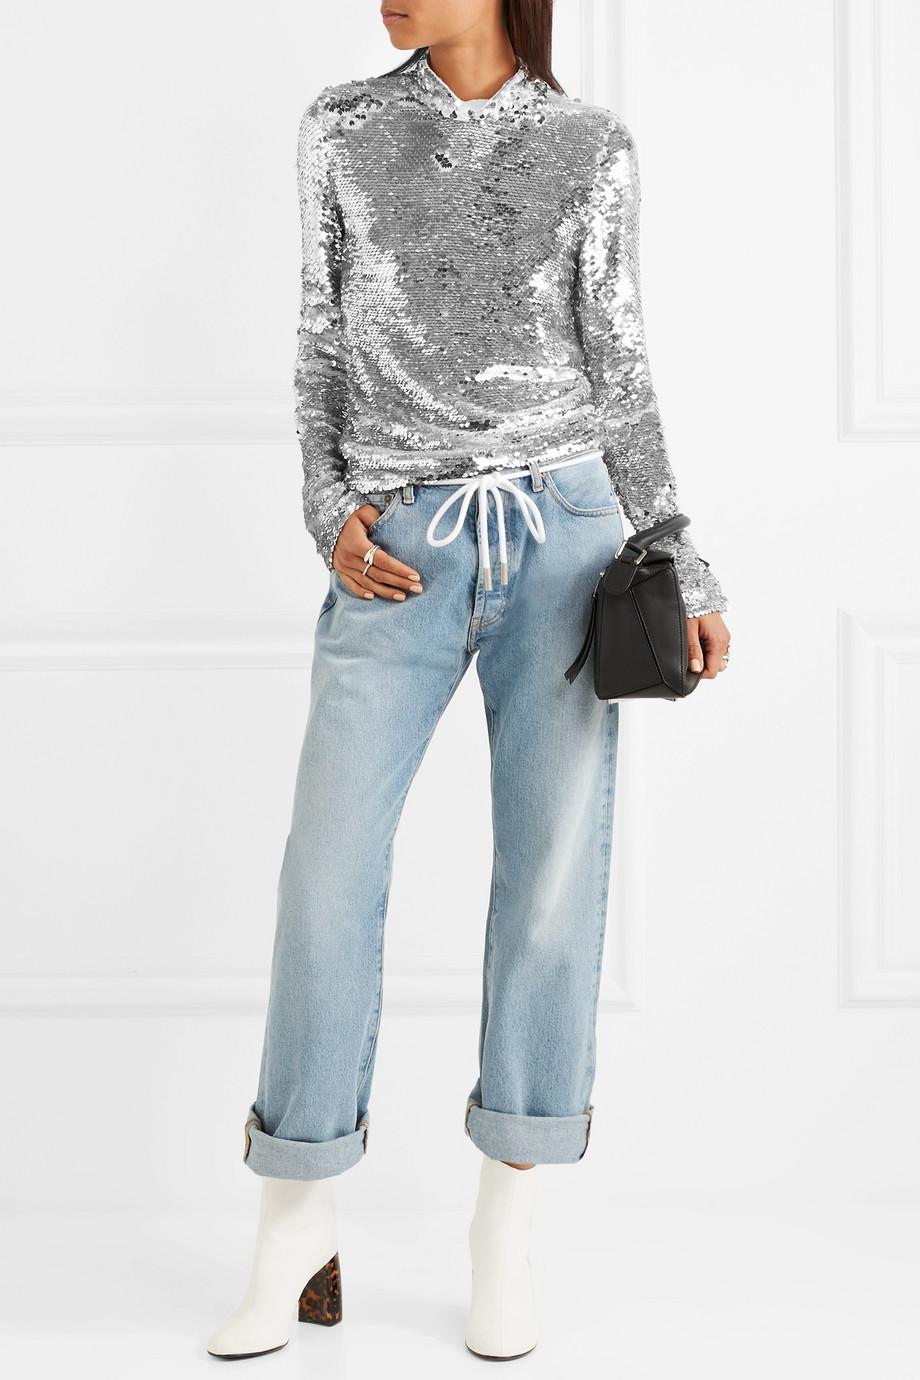 MSGM Sequined Tulle Turtleneck Top in Silver (Metallic) | Lyst